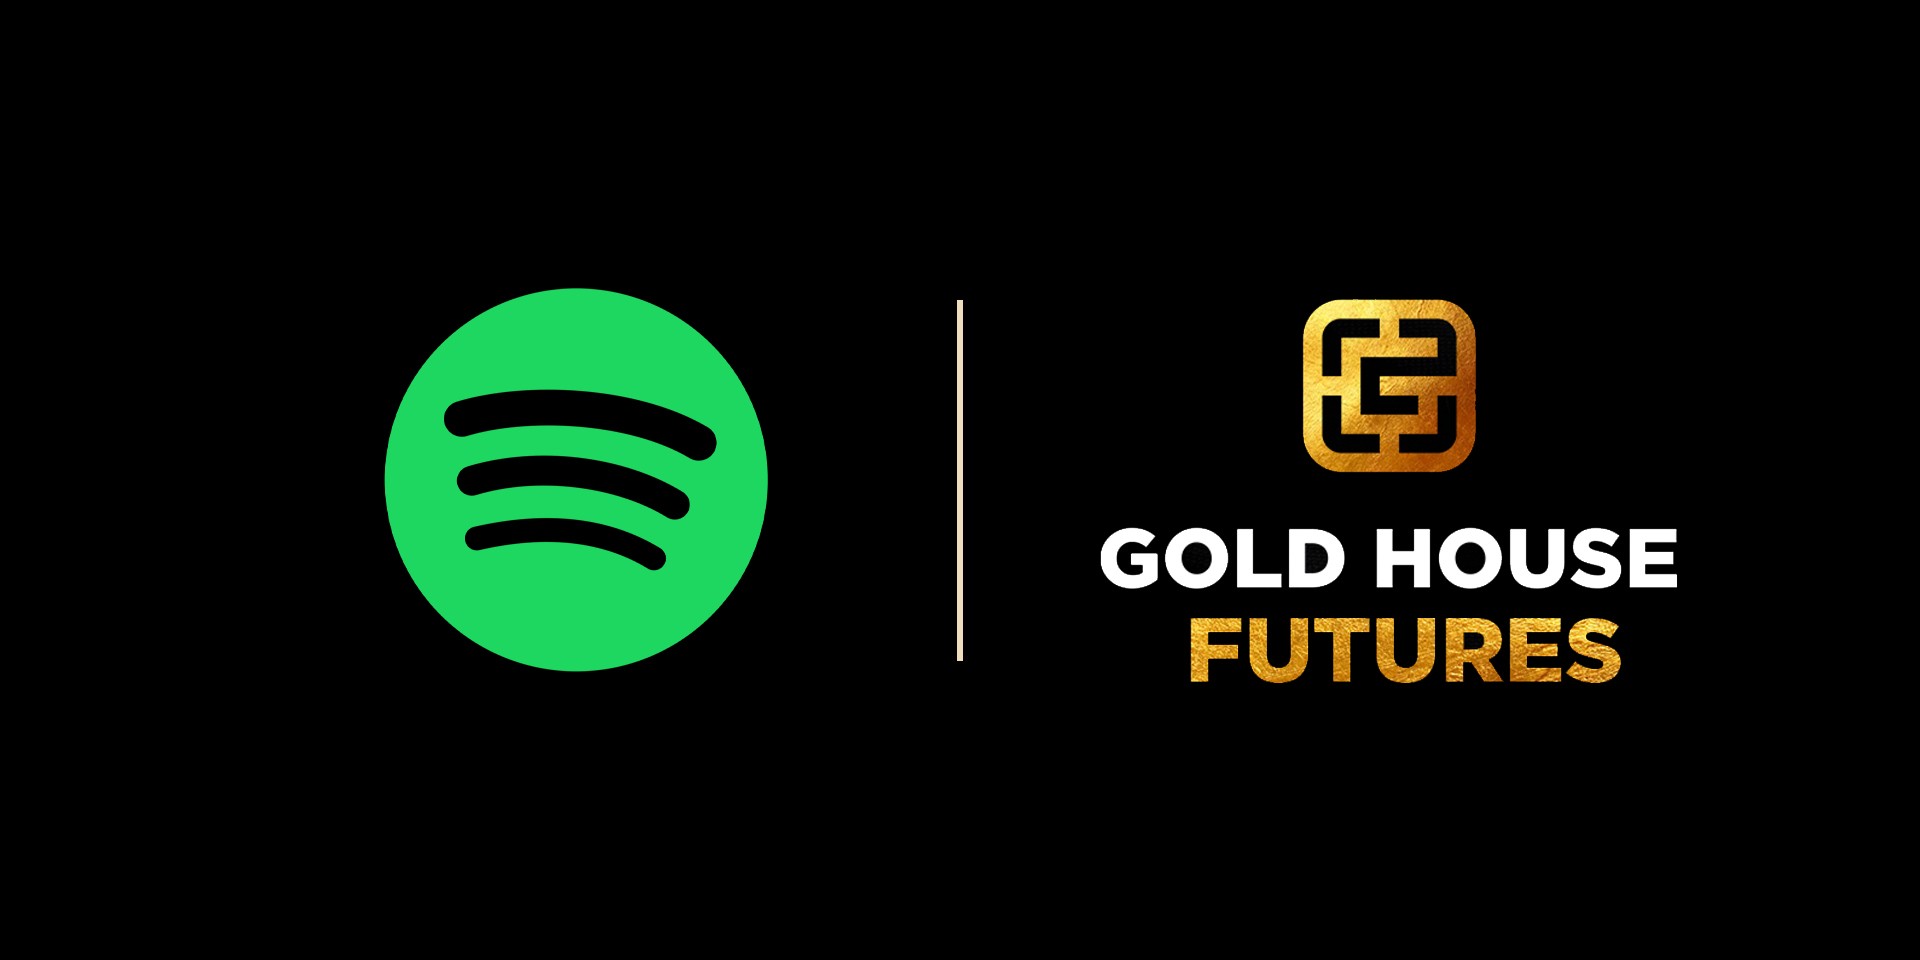 Spotify partners with Gold House for 'Futures' program to support API creatives